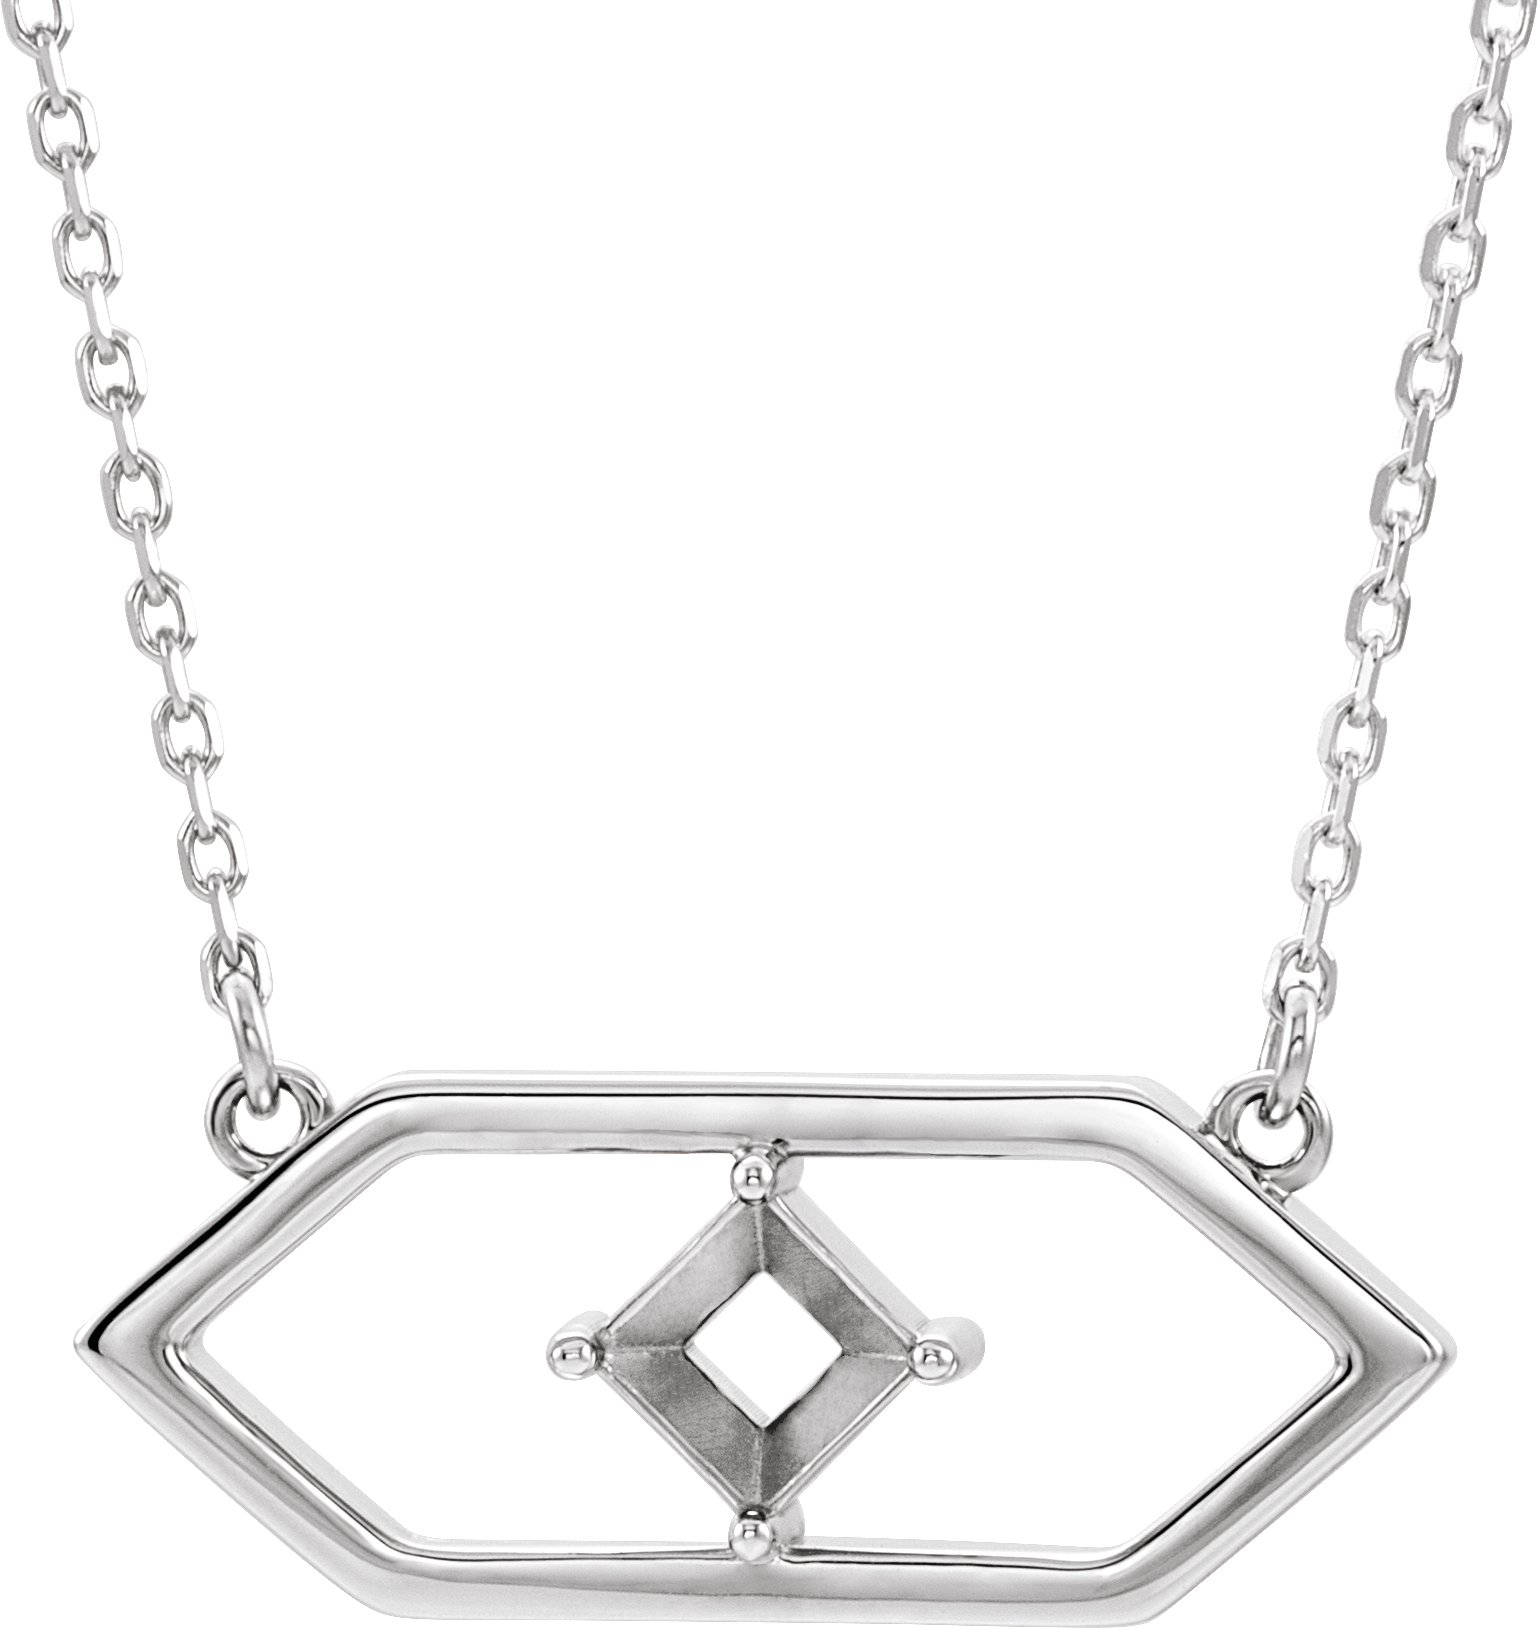 86965 / NECKLACE / Neosadený / Sterling Silver / 16 In / Poliert / Geometric Necklace Mounting